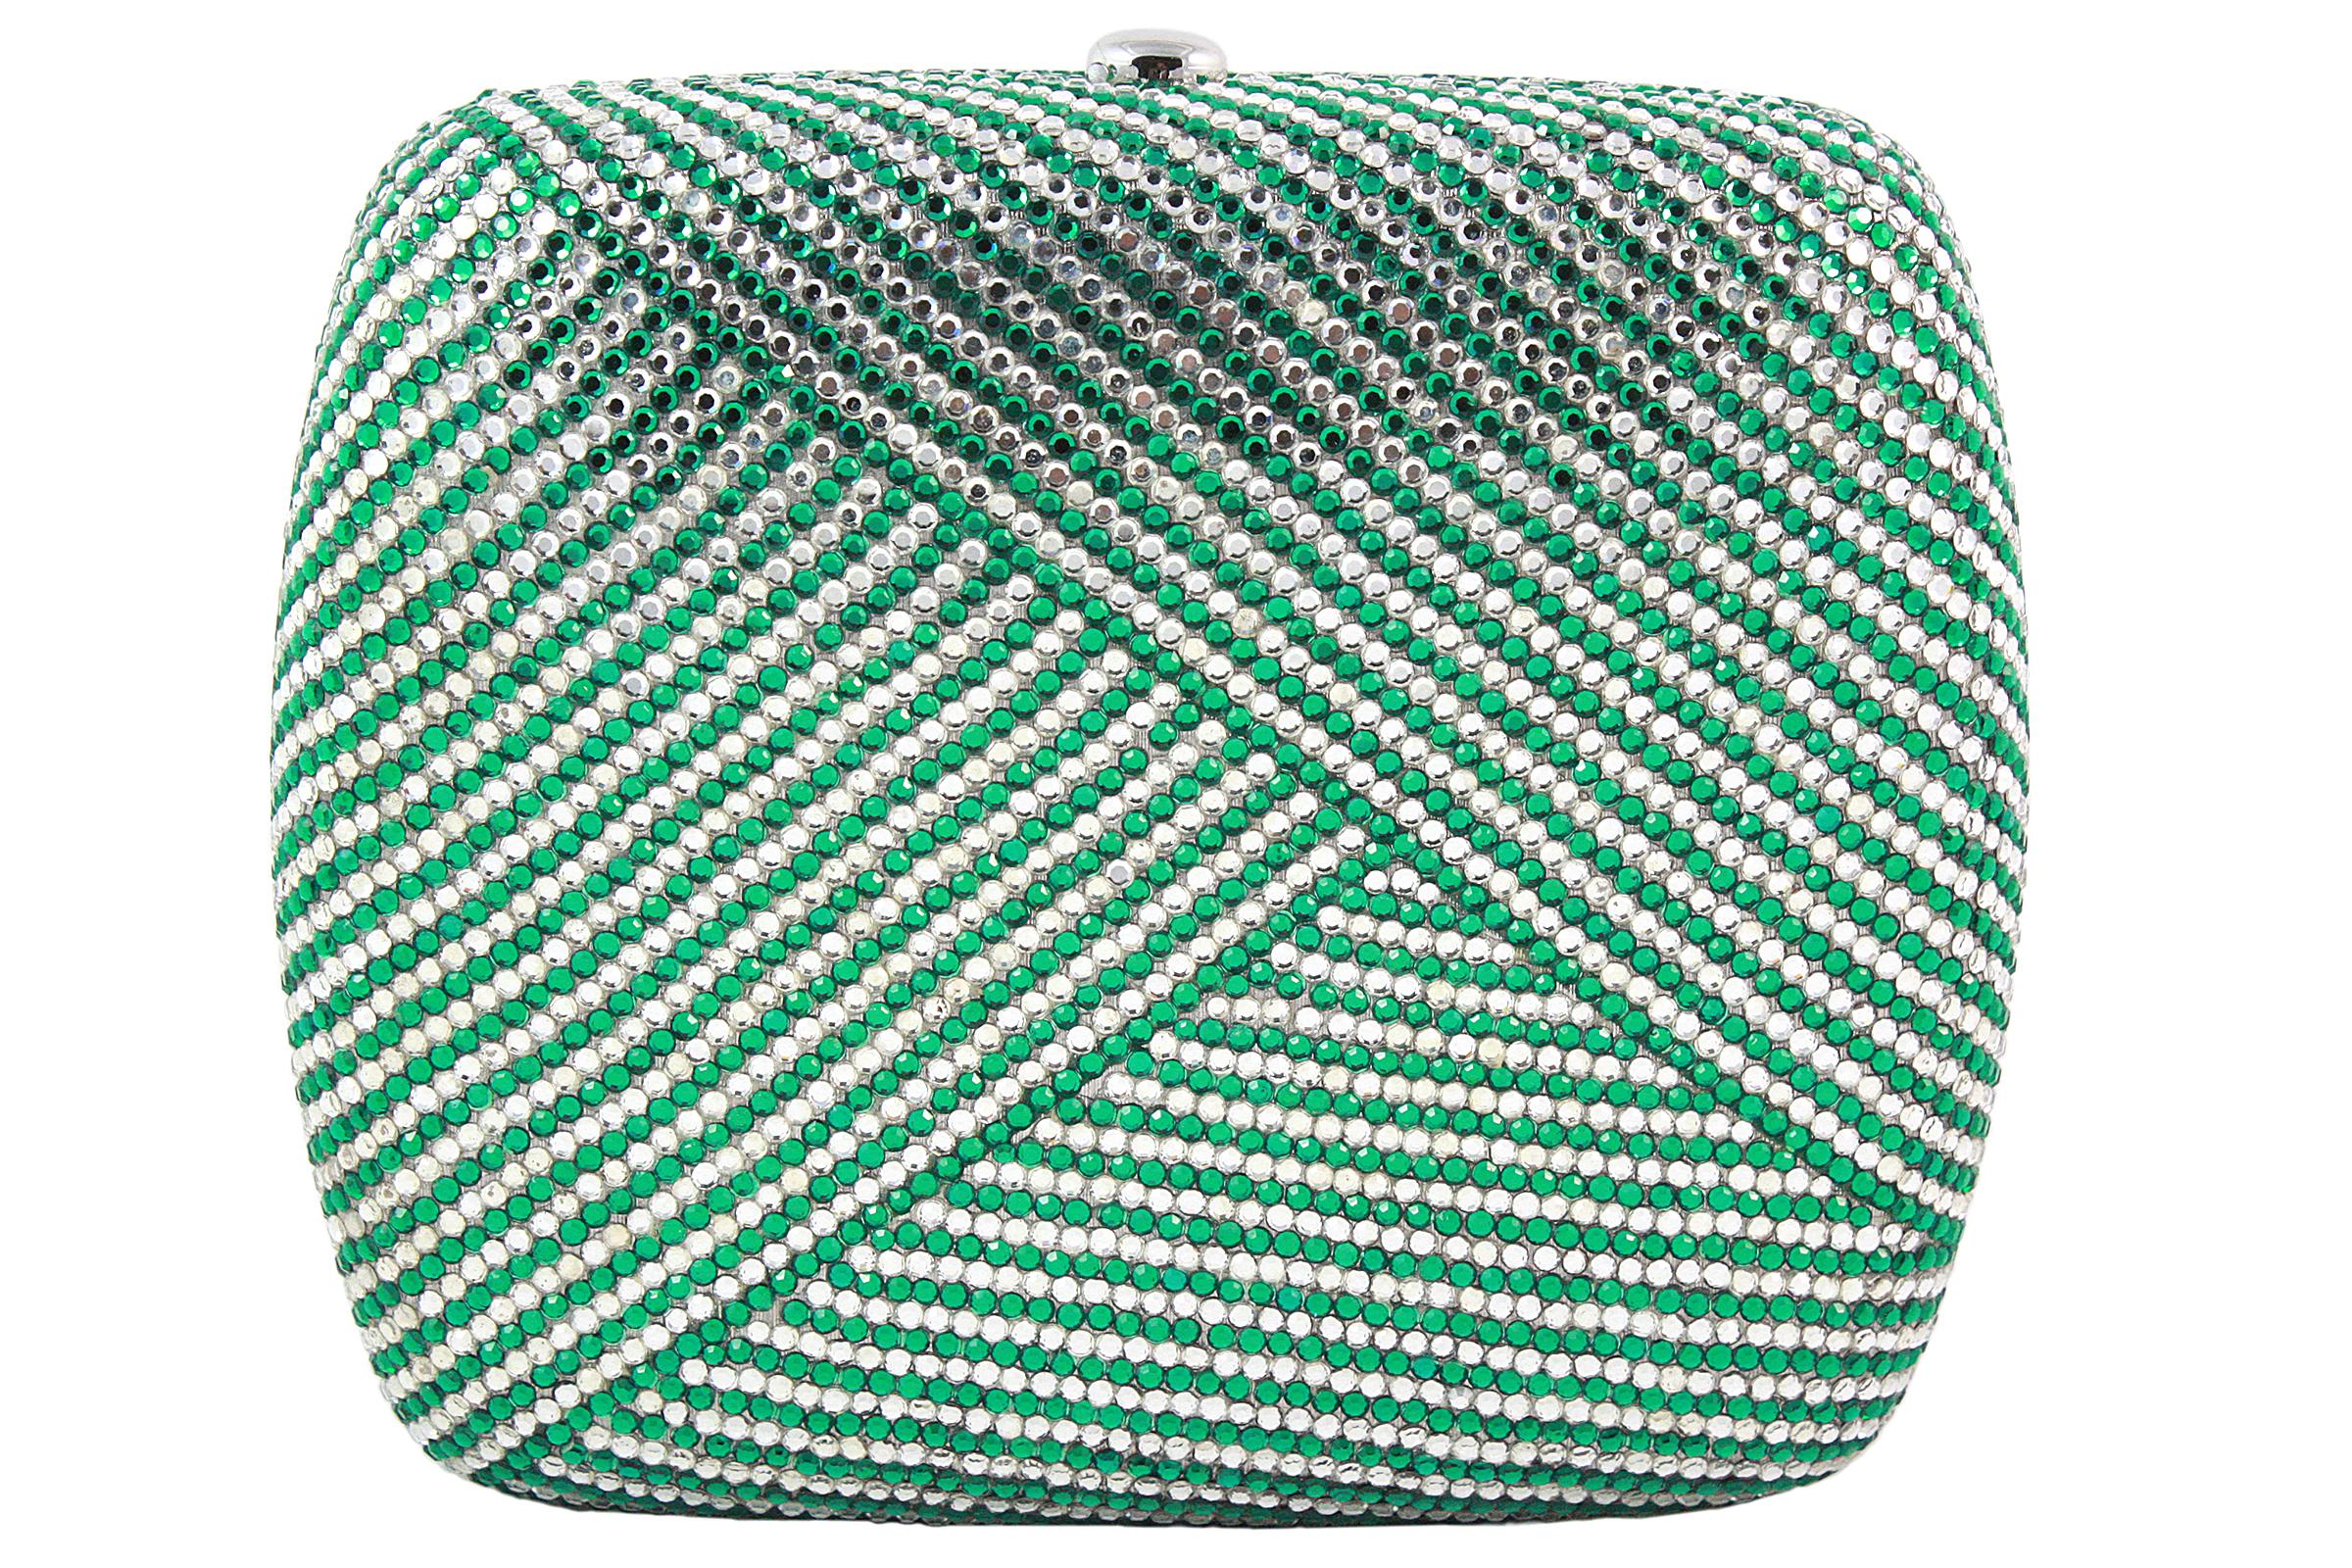 Judith Leiber clutch 
Clear and green rhinestones in a stripe pattern 
Silver snap closure 
Silver chain strap that can be stored inside 
Soft silver leather lining
Comes with silver coin purse, mirror, comb and blue dust-bag 